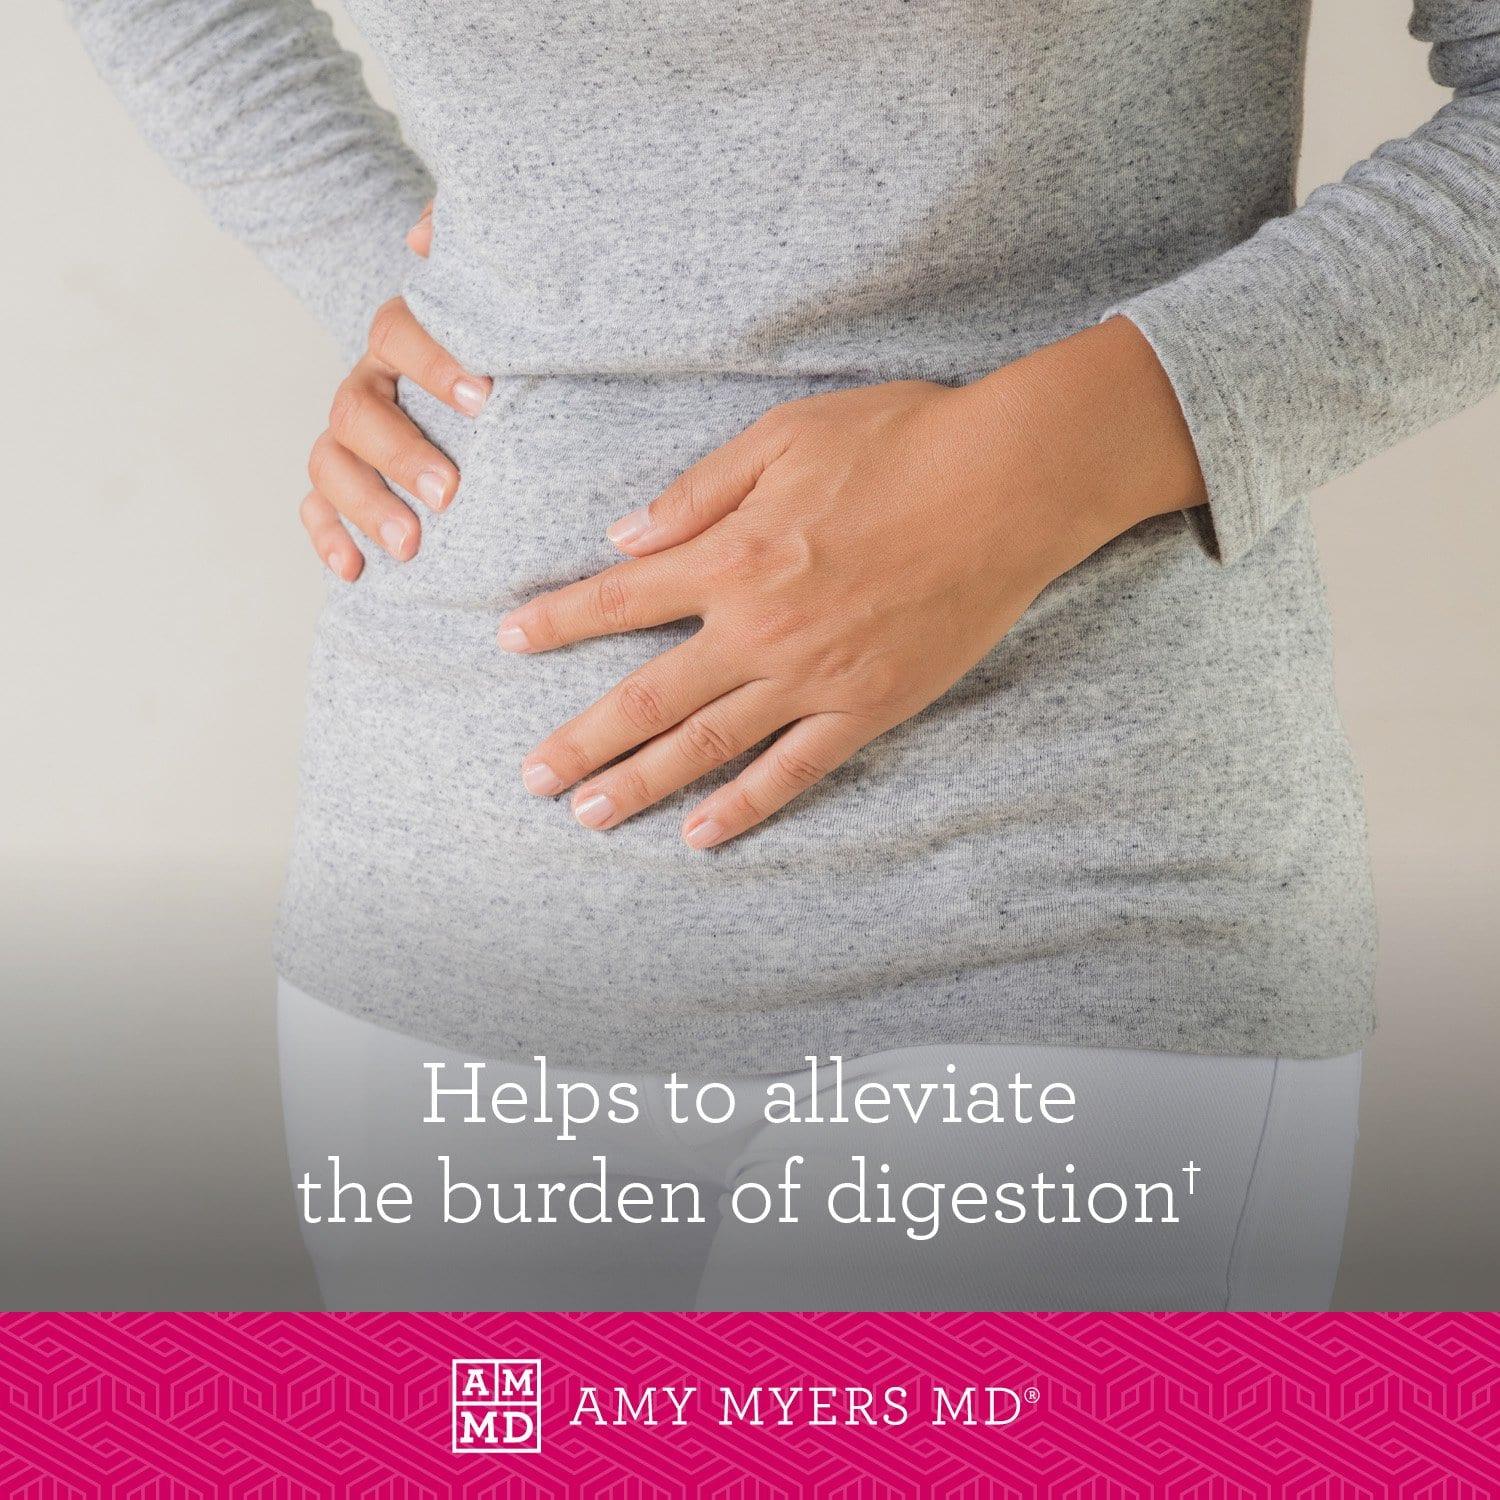 A woman feeling digestive pain - Complete Enzymes aid digestion - Amy Myers MD®